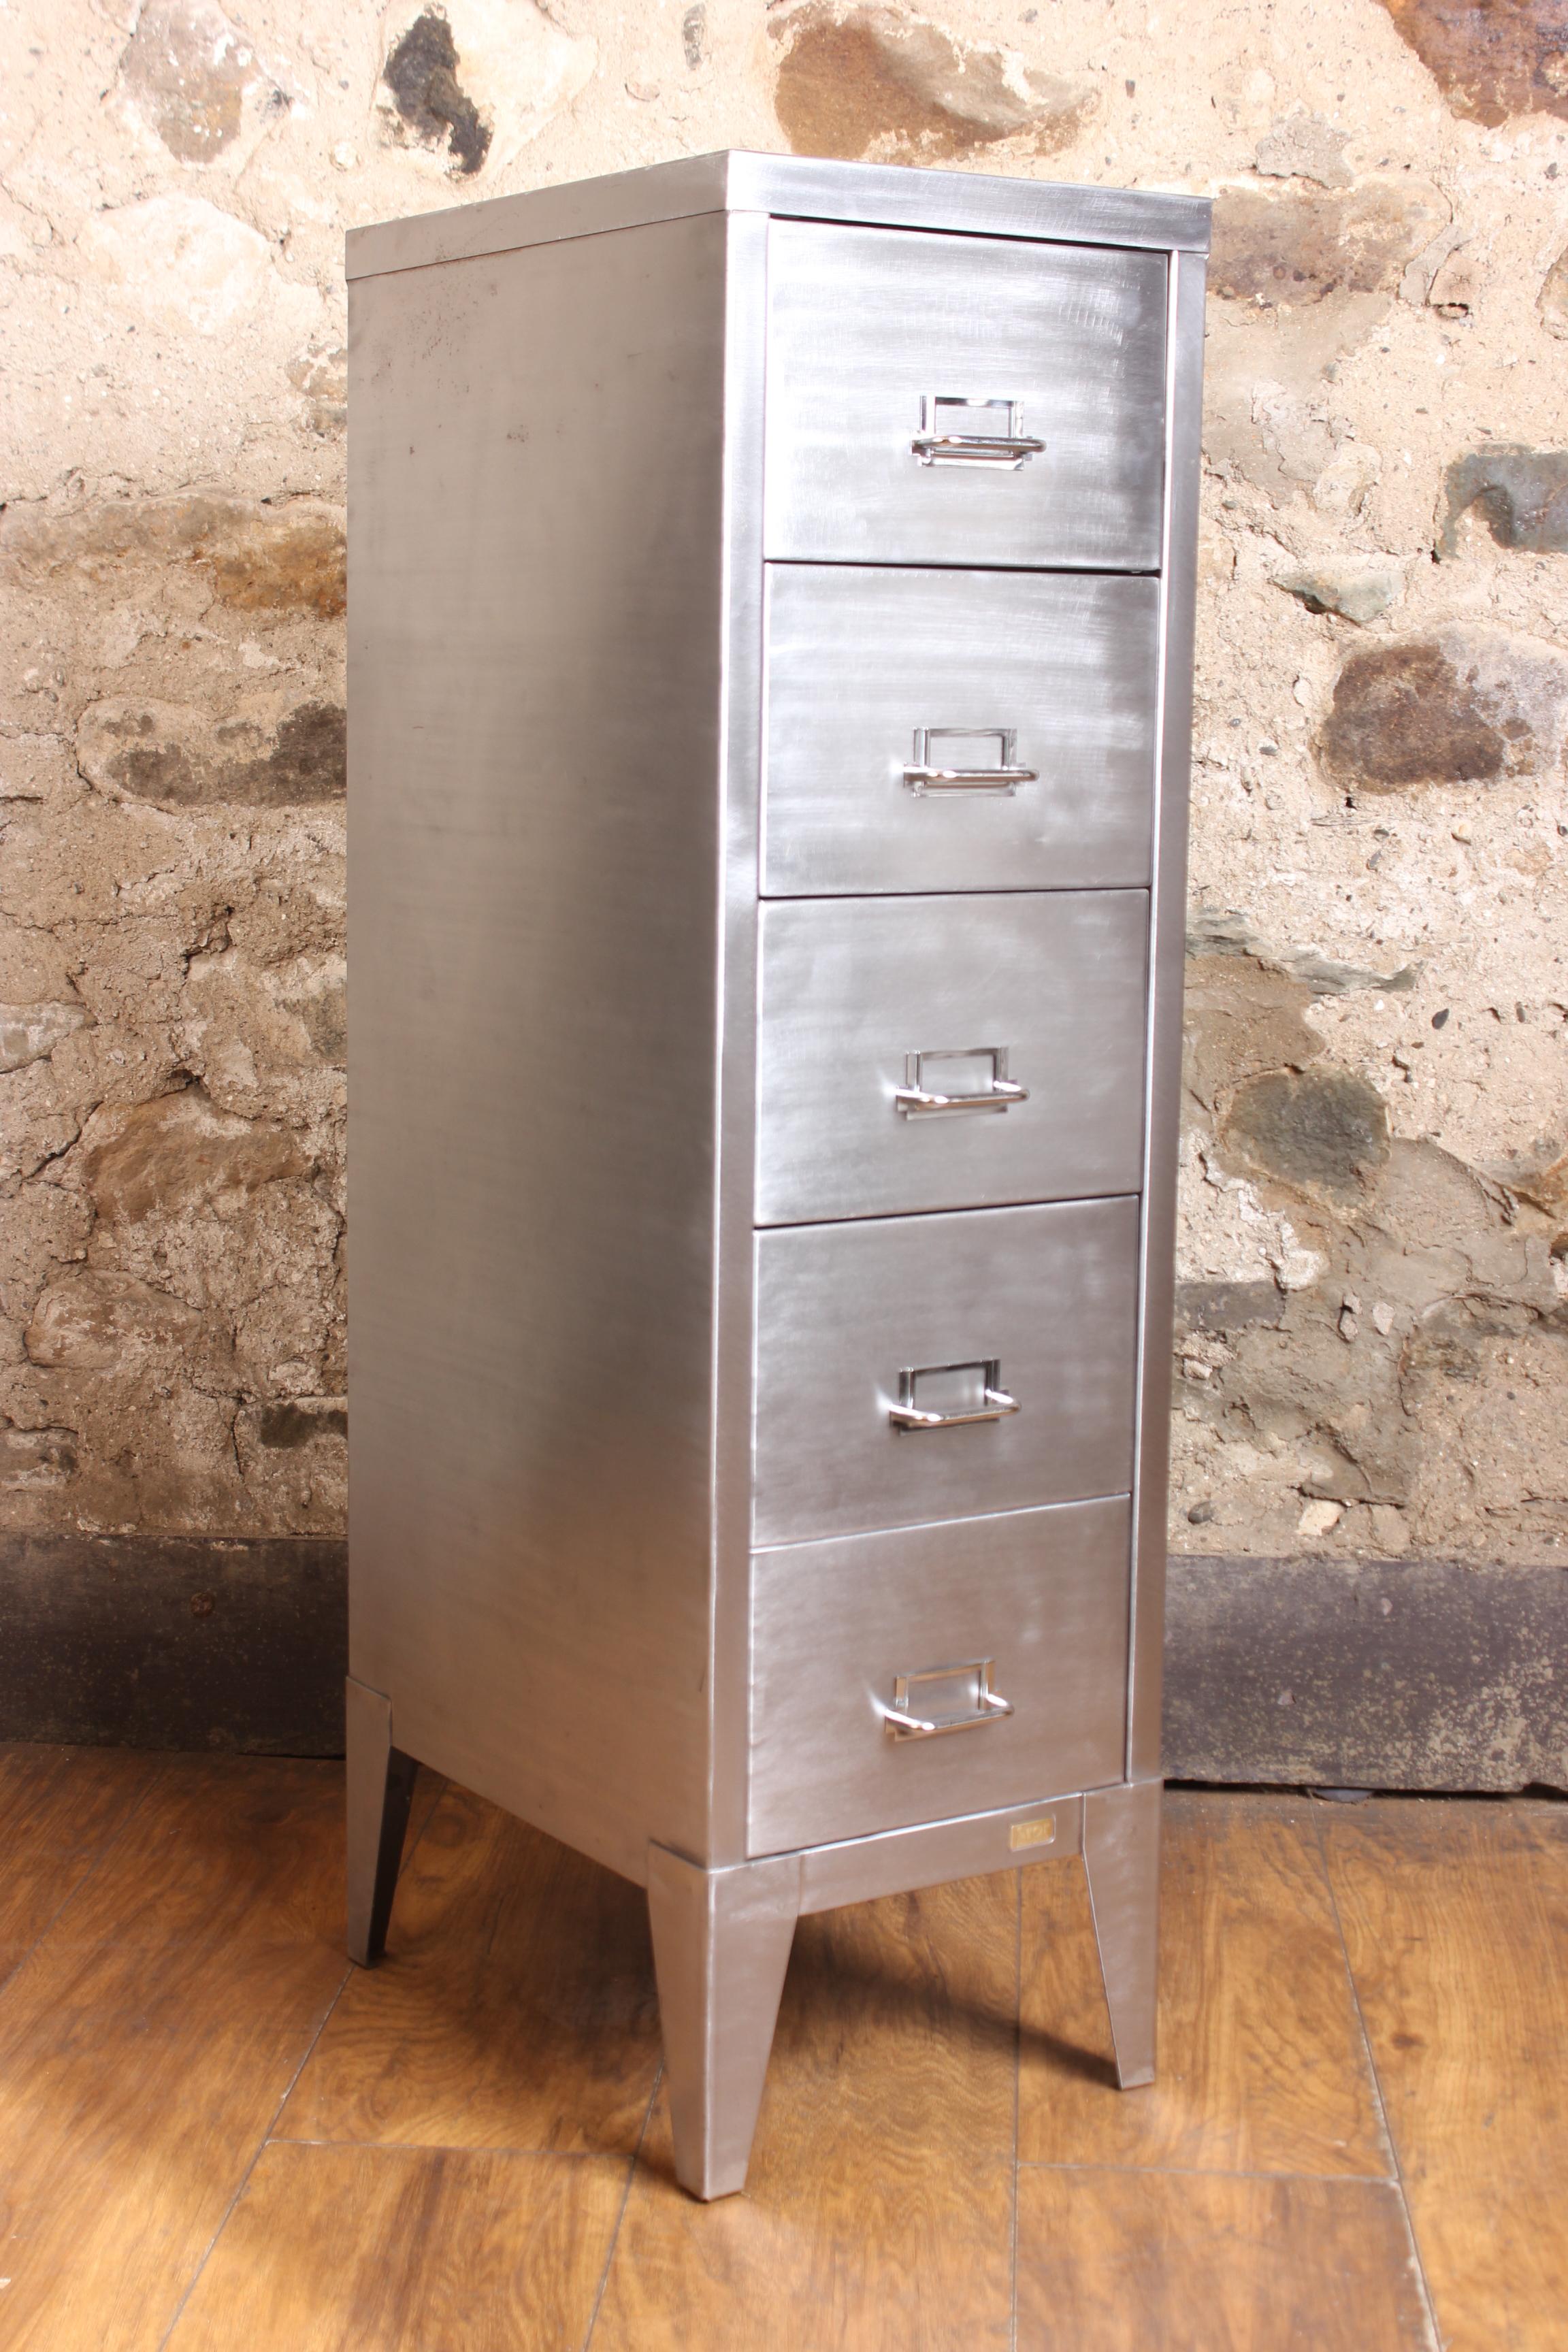 A stunning vintage 1950s industrial stripped metal 5-drawer filing cabinet. This impressive A4 size industrial design piece has been stripped back to bare metal and was manufactured in the United Kingdom by Stor all steel during the 1950s. This is a